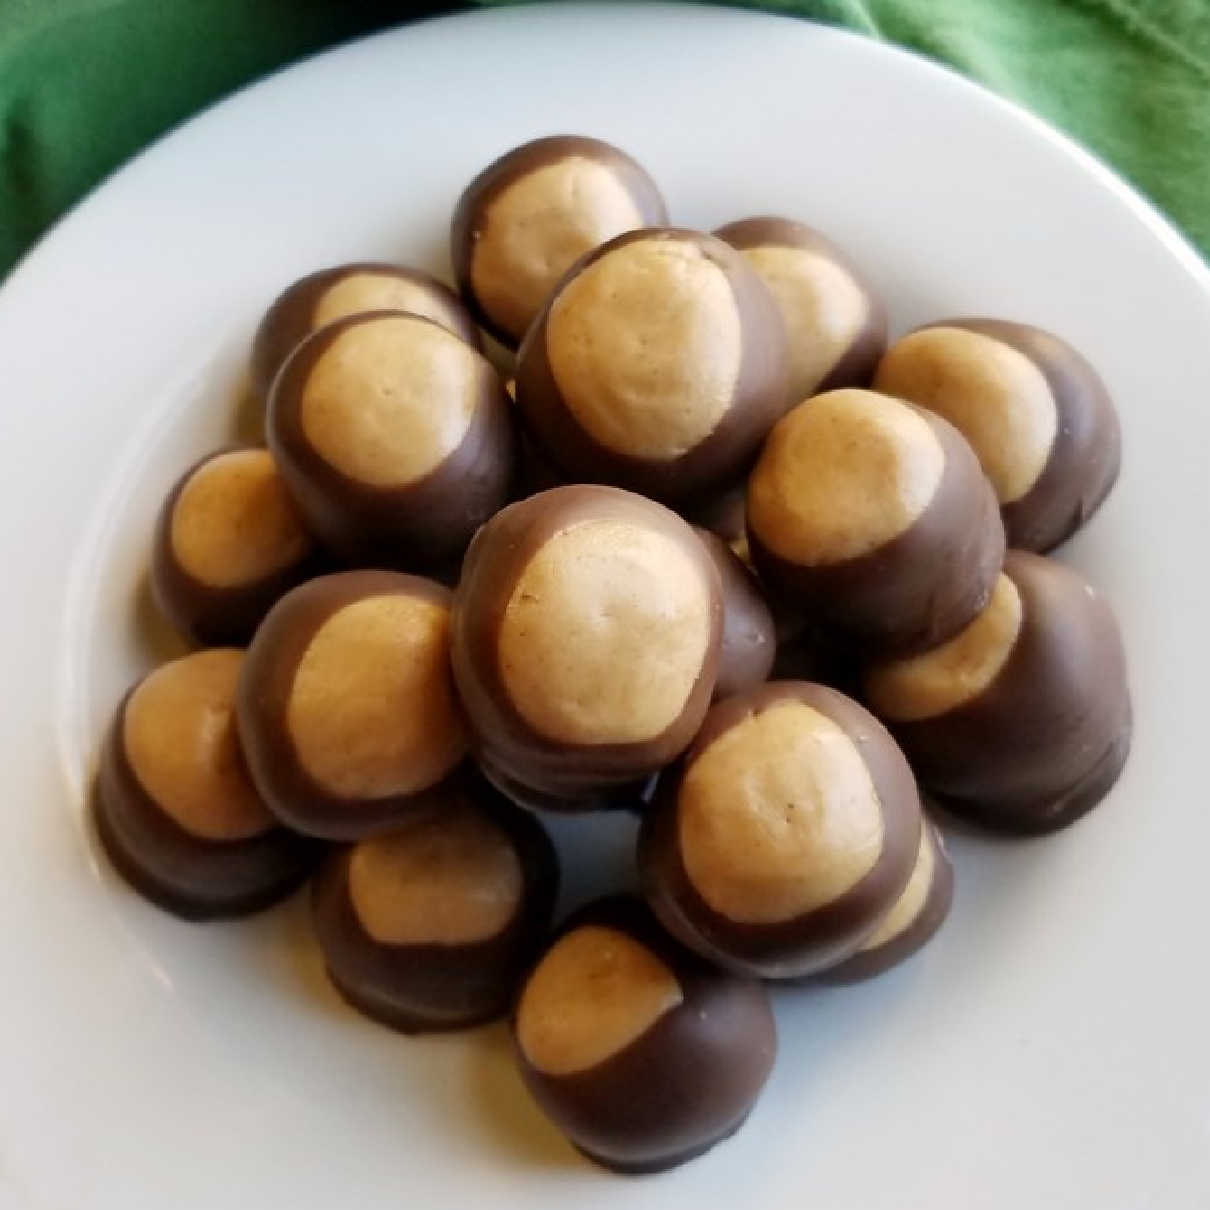 Pile of homemade buckeye candies with peanut butter center showing through chocolate shell.